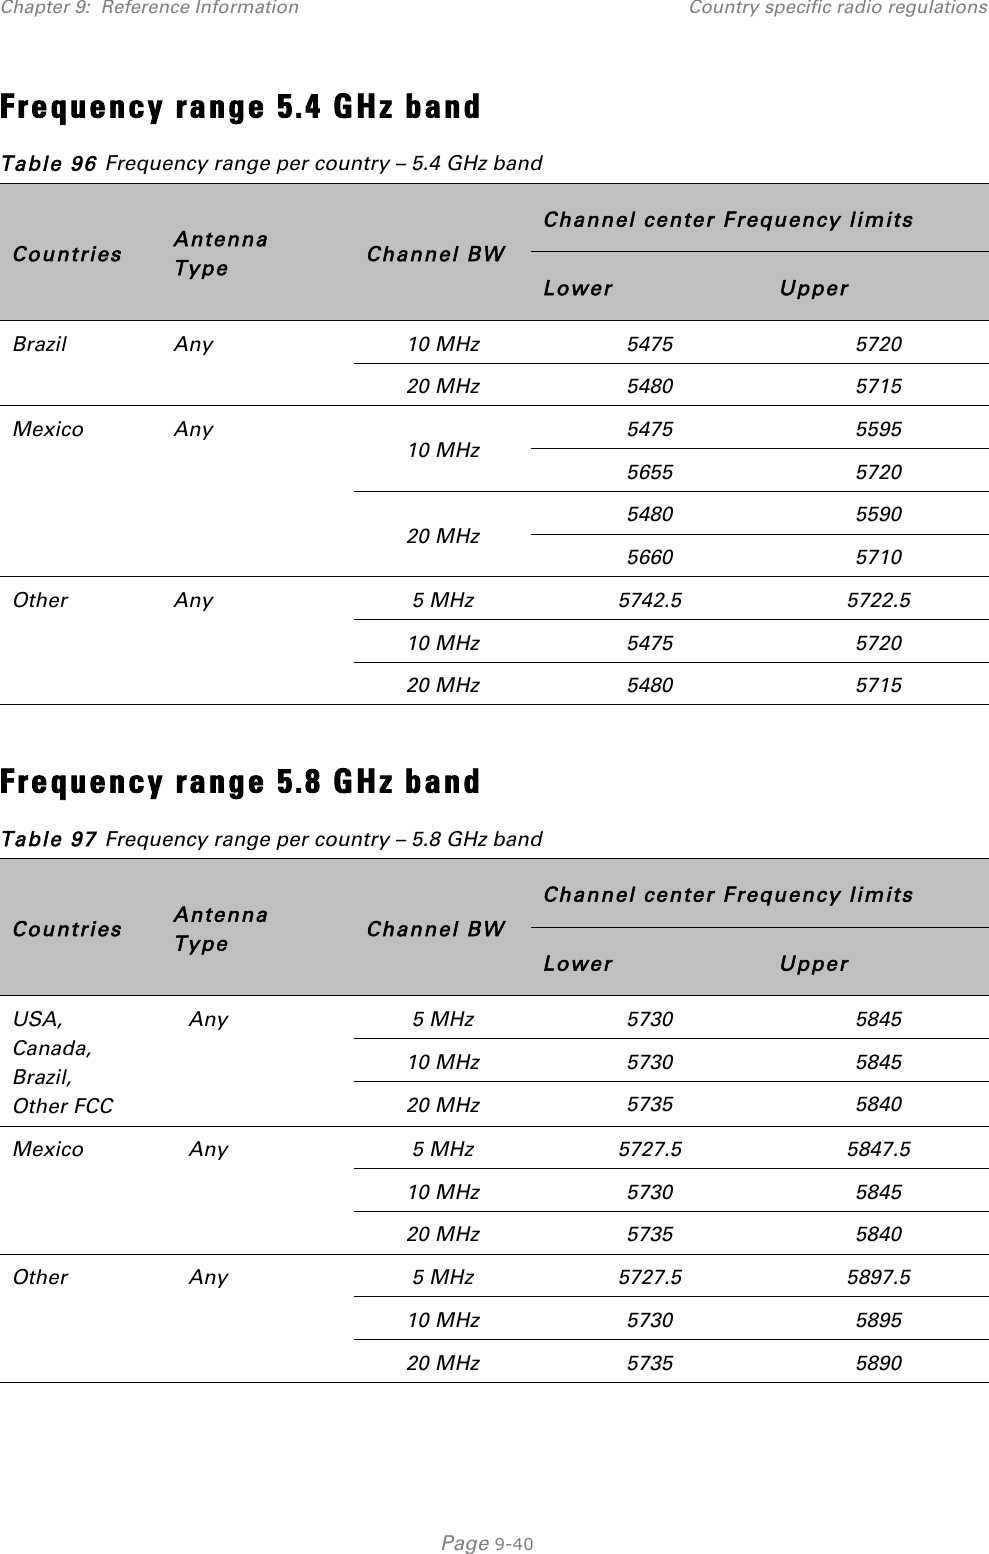 Chapter 9:  Reference Information Country specific radio regulations   Page 9-40 Frequency range 5.4 GHz band Table 96 Frequency range per country – 5.4 GHz band Countries Antenna Type Channel BW Channel center Frequency limits Lower Upper Brazil Any 10 MHz 5475 5720 20 MHz 5480 5715 Mexico Any 10 MHz 5475 5595 5655 5720 20 MHz 5480 5590 5660 5710 Other Any 5 MHz 5742.5 5722.5 10 MHz 5475 5720 20 MHz 5480 5715  Frequency range 5.8 GHz band Table 97 Frequency range per country – 5.8 GHz band Countries Antenna Type Channel BW Channel center Frequency limits Lower Upper USA,  Canada, Brazil,  Other FCC Any 5 MHz 5730 5845 10 MHz 5730 5845 20 MHz 5735 5840 Mexico Any 5 MHz 5727.5 5847.5 10 MHz 5730 5845 20 MHz 5735 5840 Other Any 5 MHz 5727.5 5897.5 10 MHz 5730 5895 20 MHz 5735 5890  